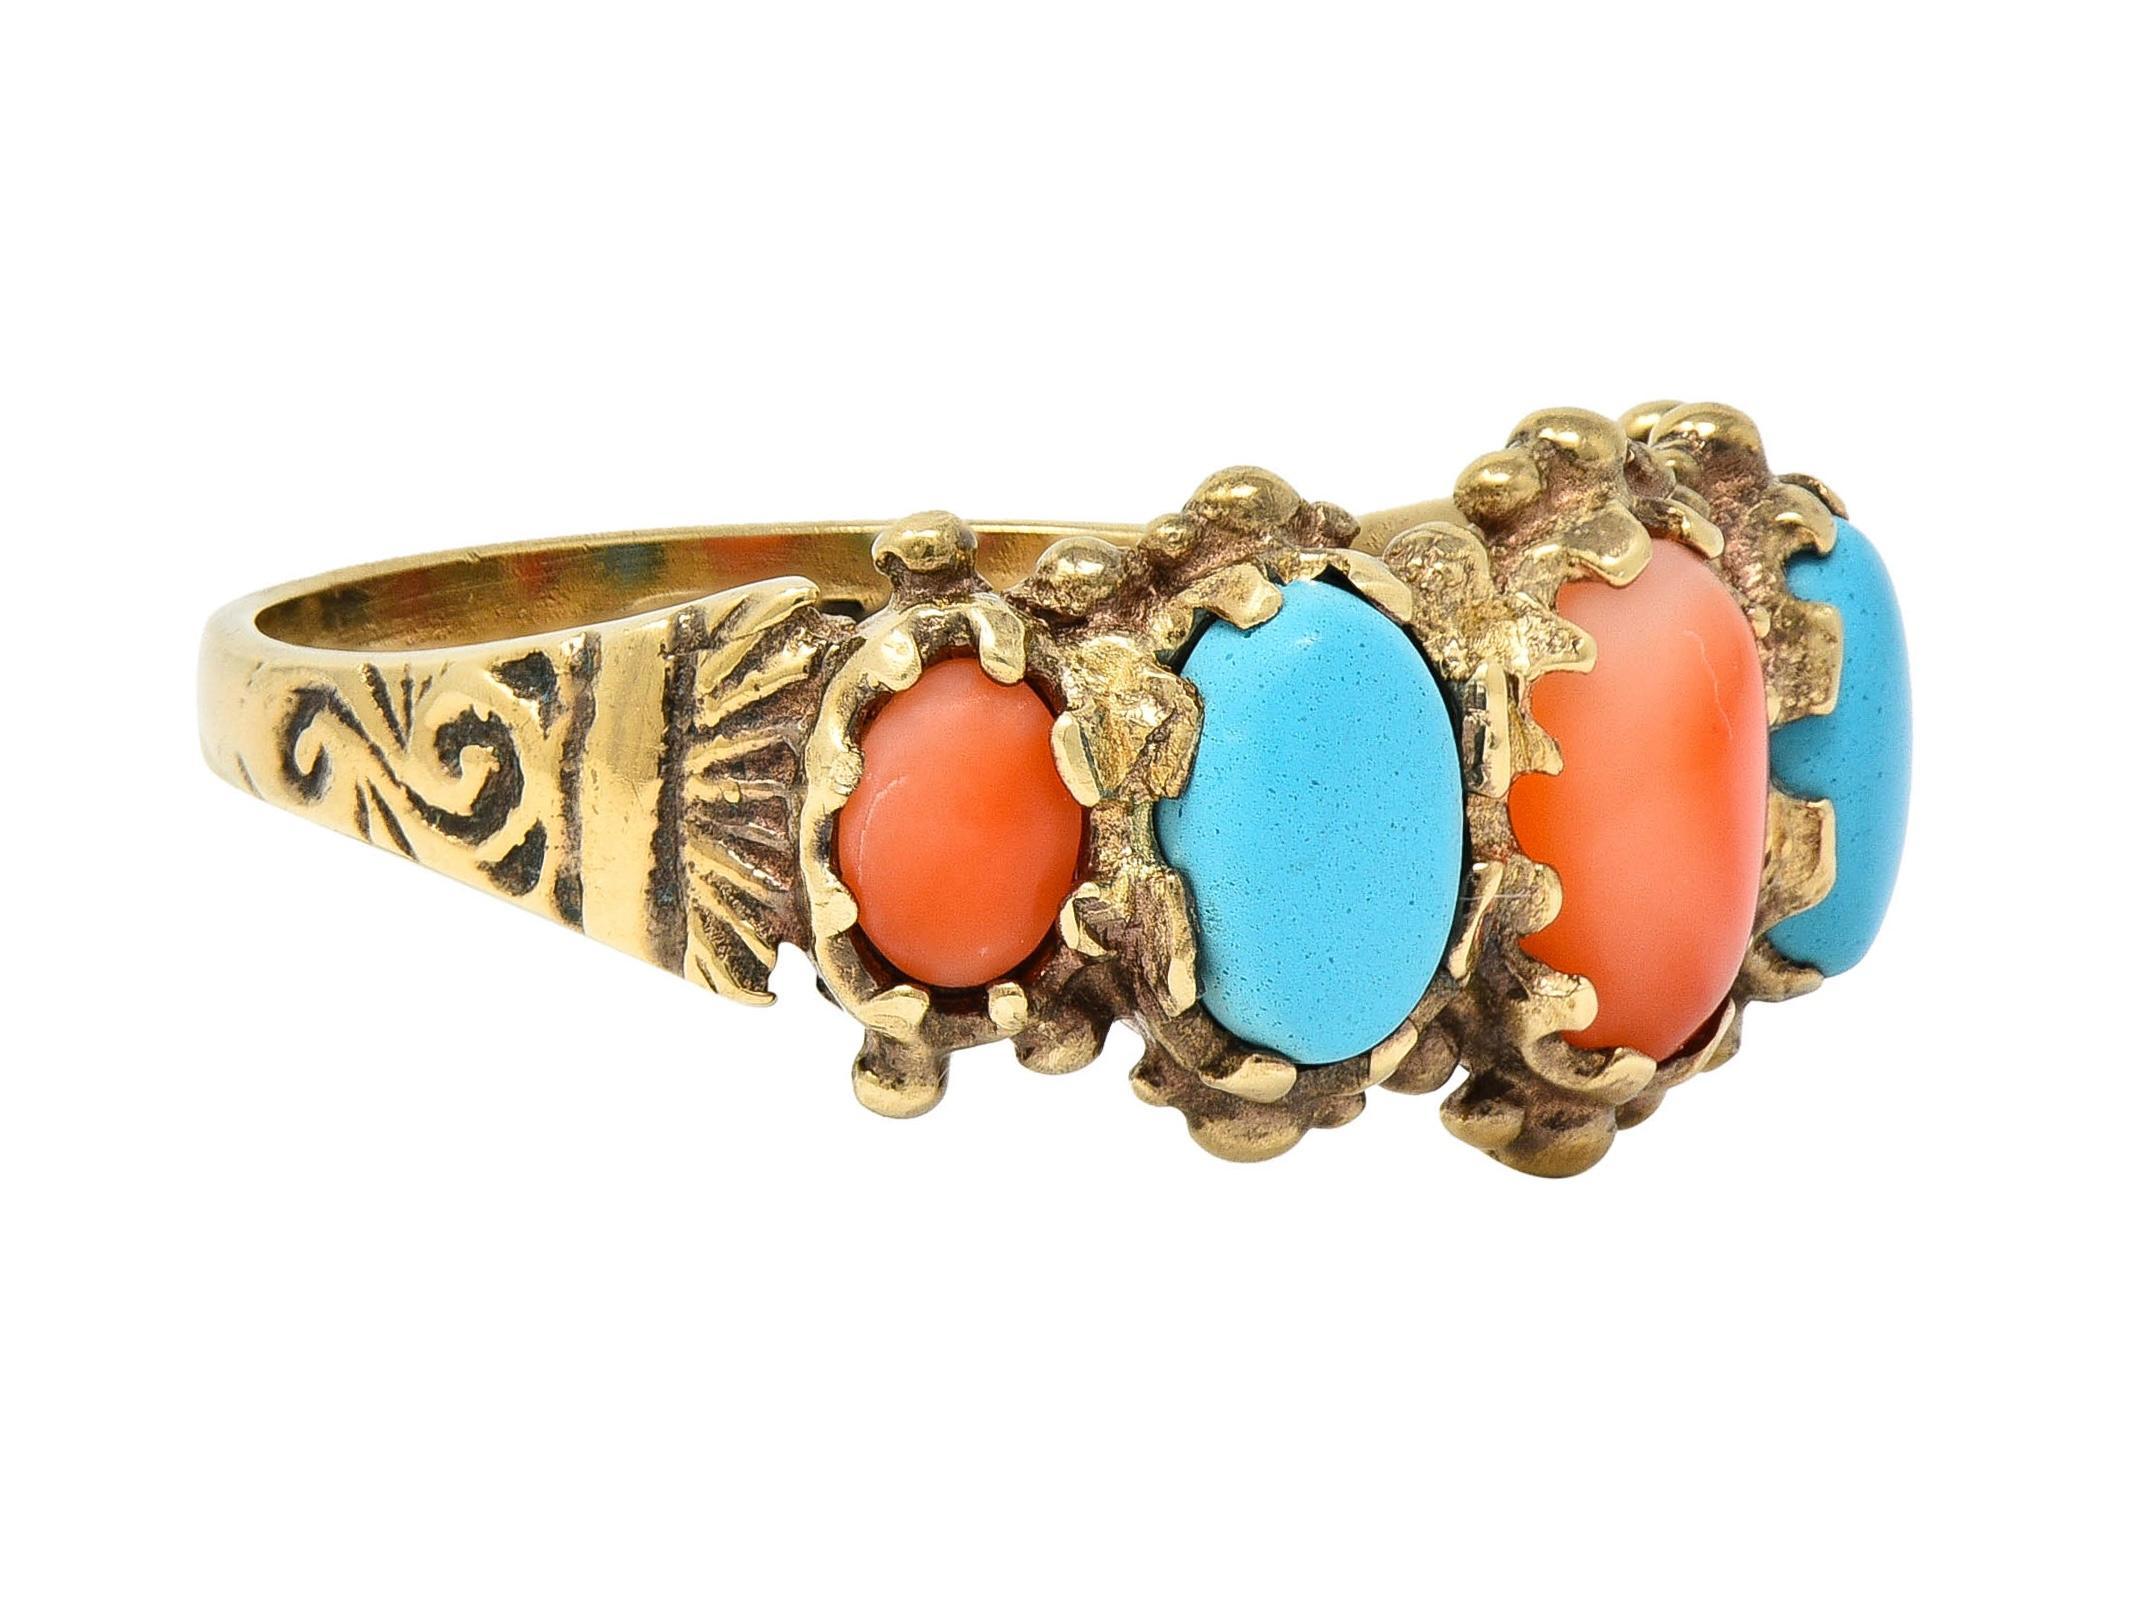 Centering five oval-shaped cabochons of coral and turquoise alternating in pattern
Ranging in size from 2.5 x 4.0 mm to 4.5 x 6.5 mm - prong set east to west
Coral is medium reddish orange with some white swirling 
Turquoise is opaque light to